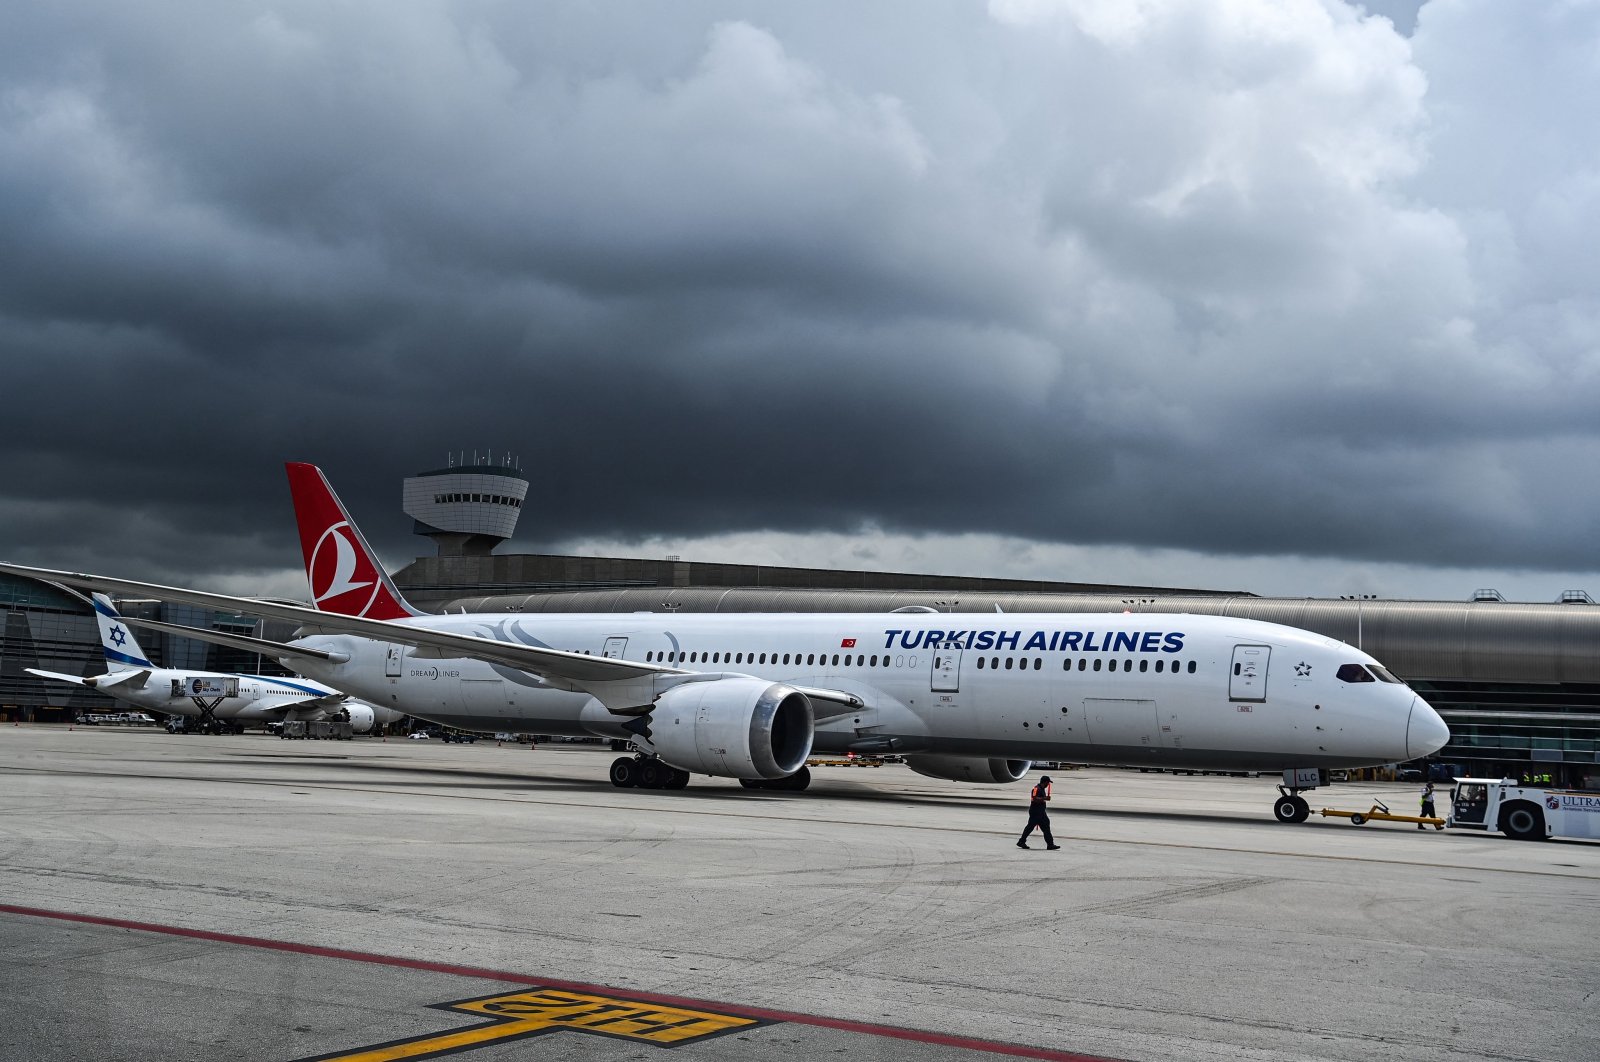 A Turkish Airlines plane prepares to take off from Miami International Airport, Miami, U.S., June 16, 2021. (AFP Photo)